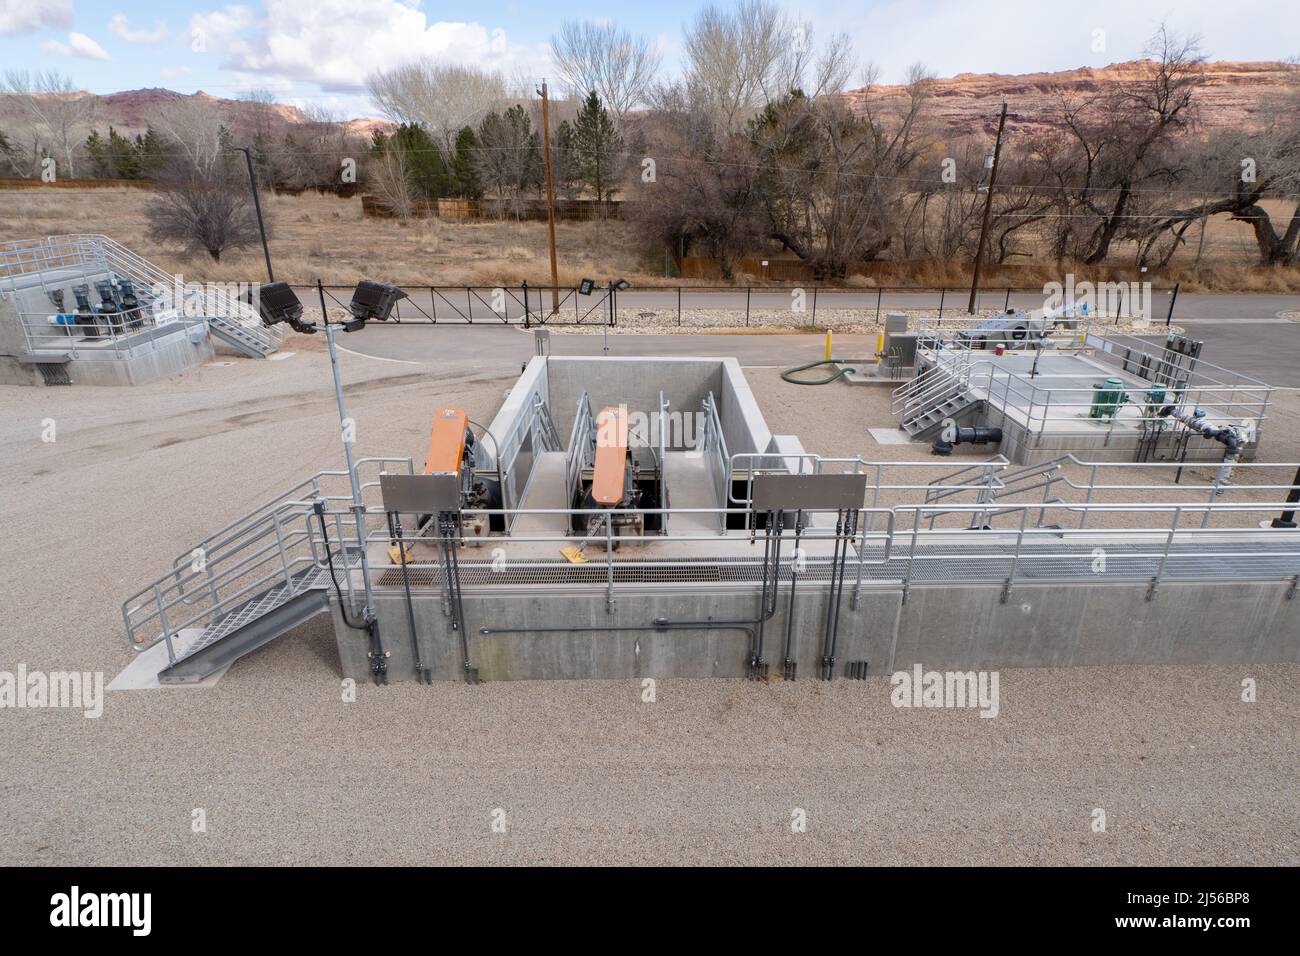 The influent or incoming sewage stations at an SBR or sequential batch reactor wastewater treatment plant in Moab, Utah.  At left are the pumps for th Stock Photo